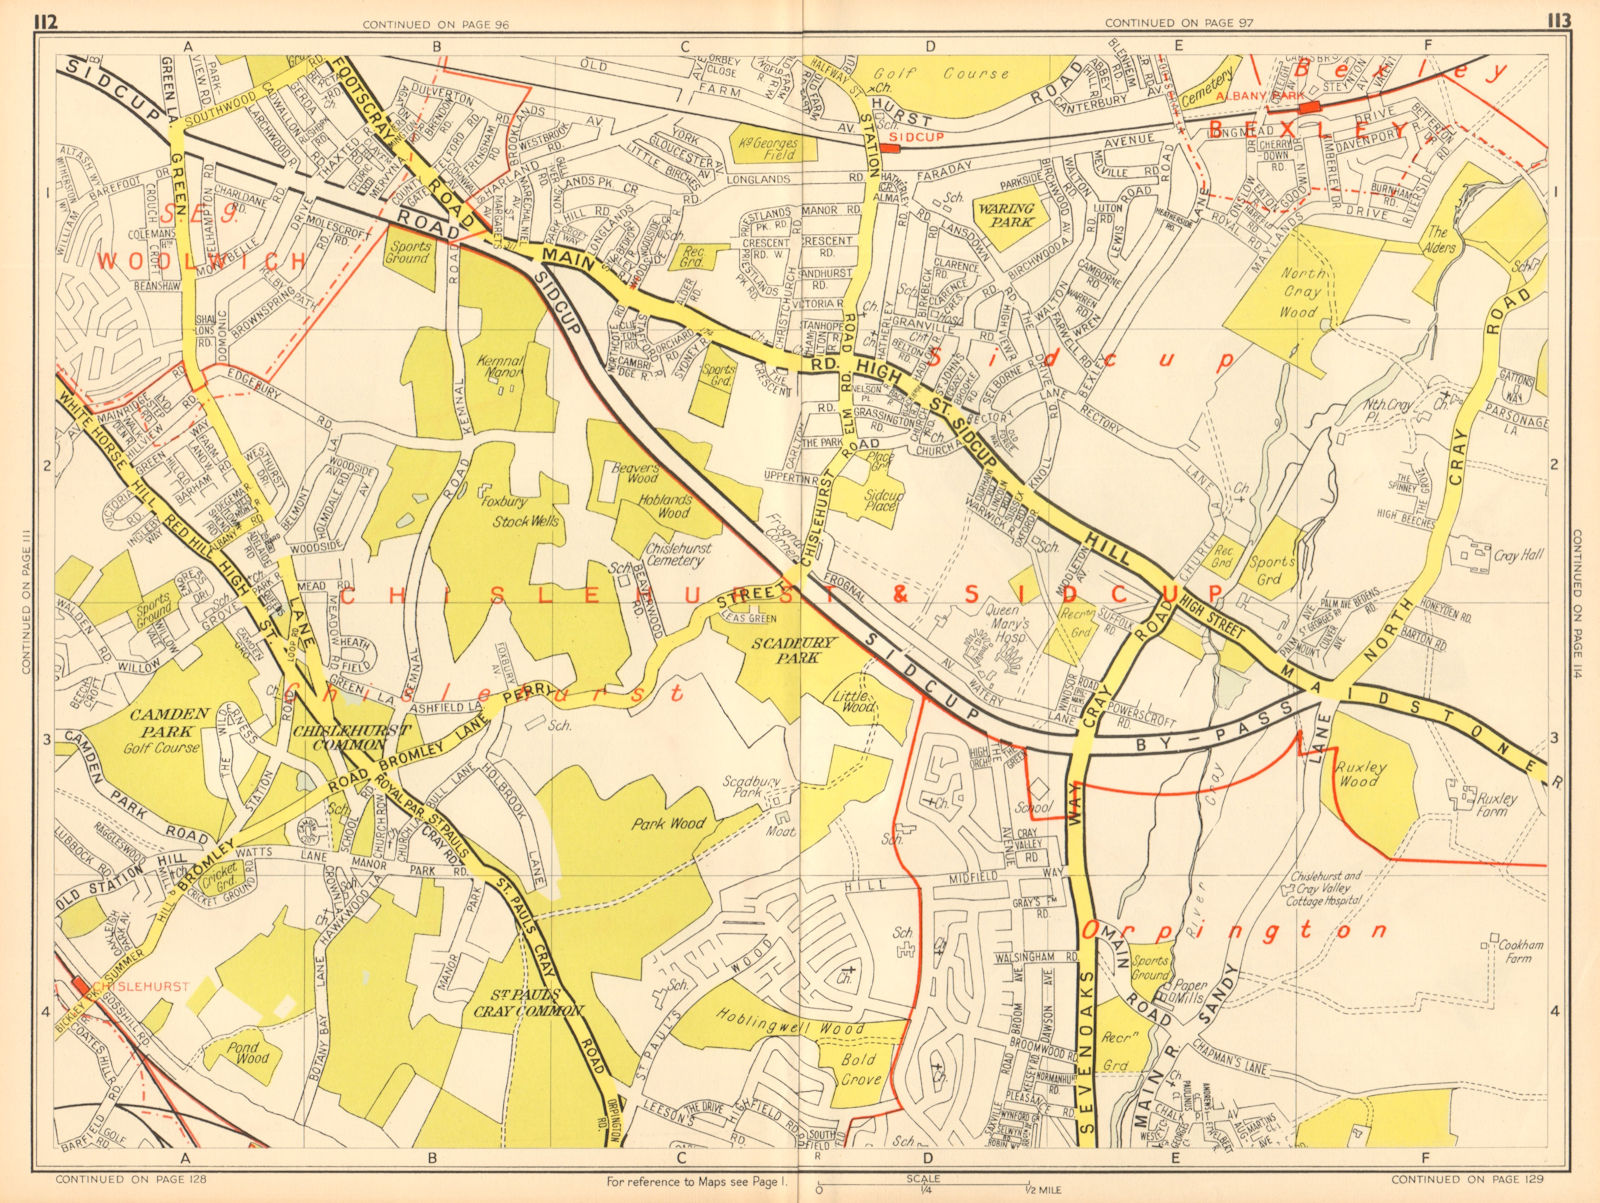 Associate Product CHISLEHURST SIDCUP Orpington Bexley Eltham. GEOGRAPHERS' A-Z 1948 old map